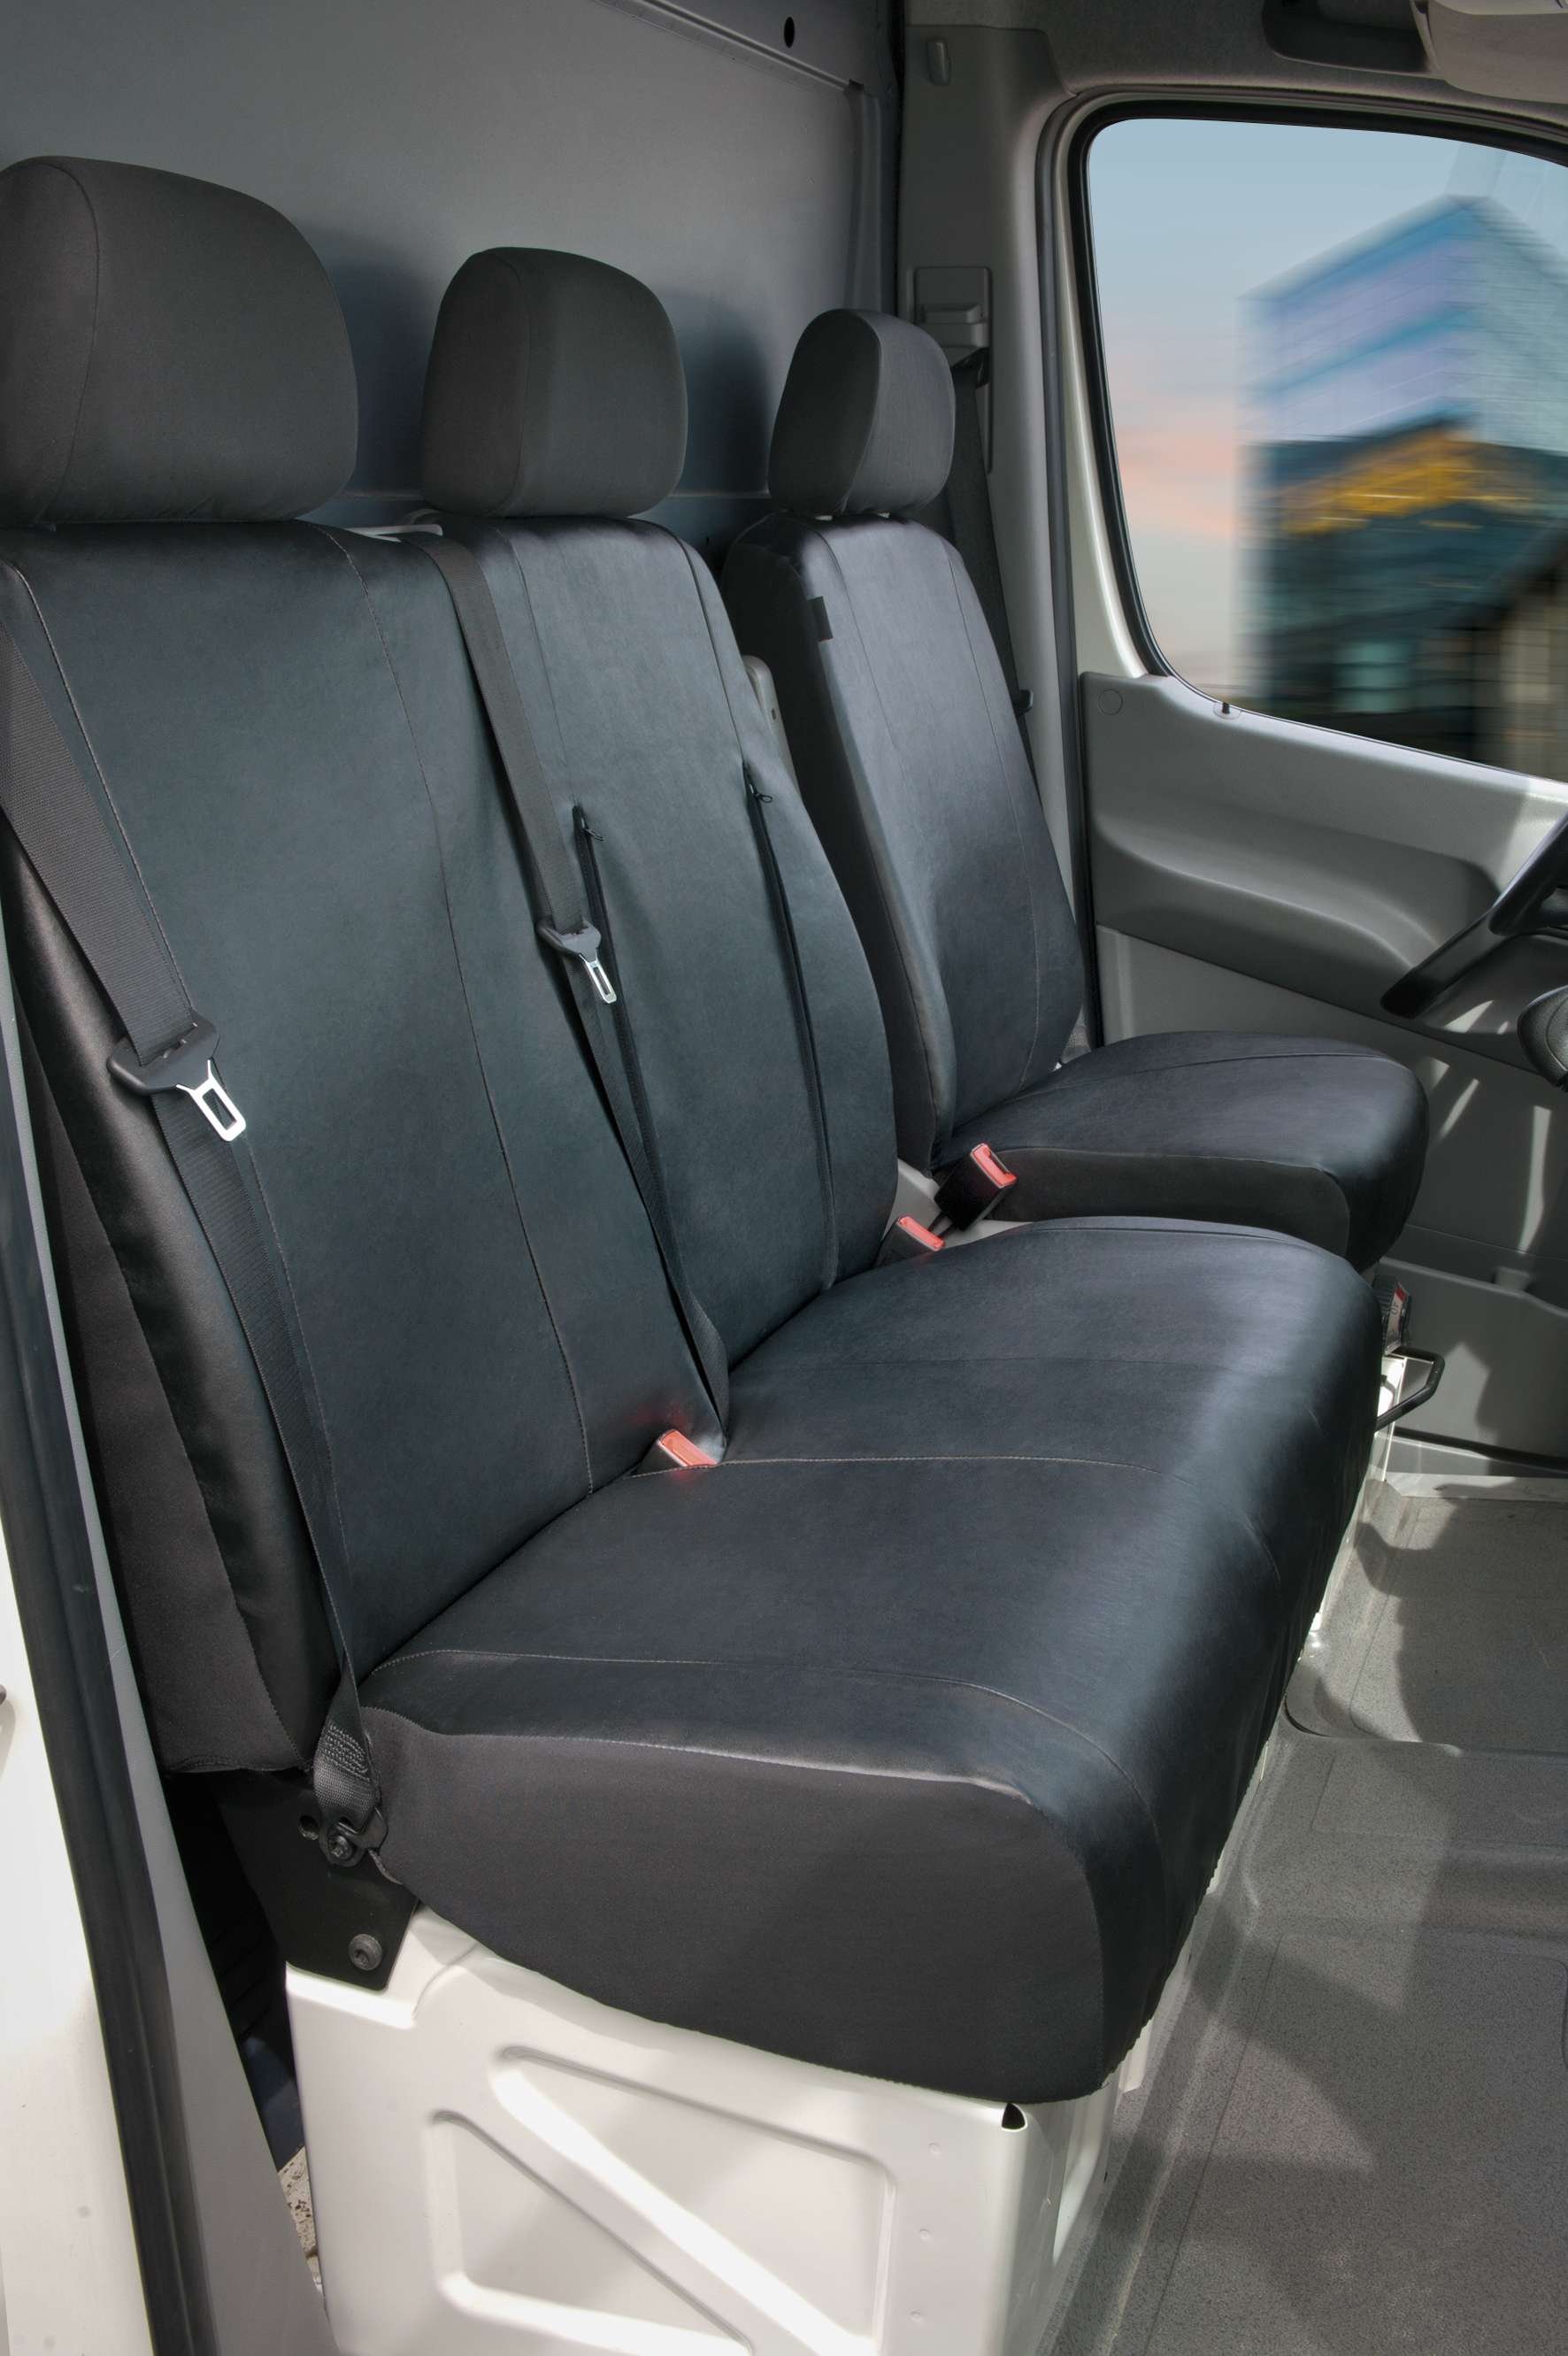 Seat cover made of imitation leather for Mercedes-Benz Sprinter, VW LT, single seat cover, double seat cover